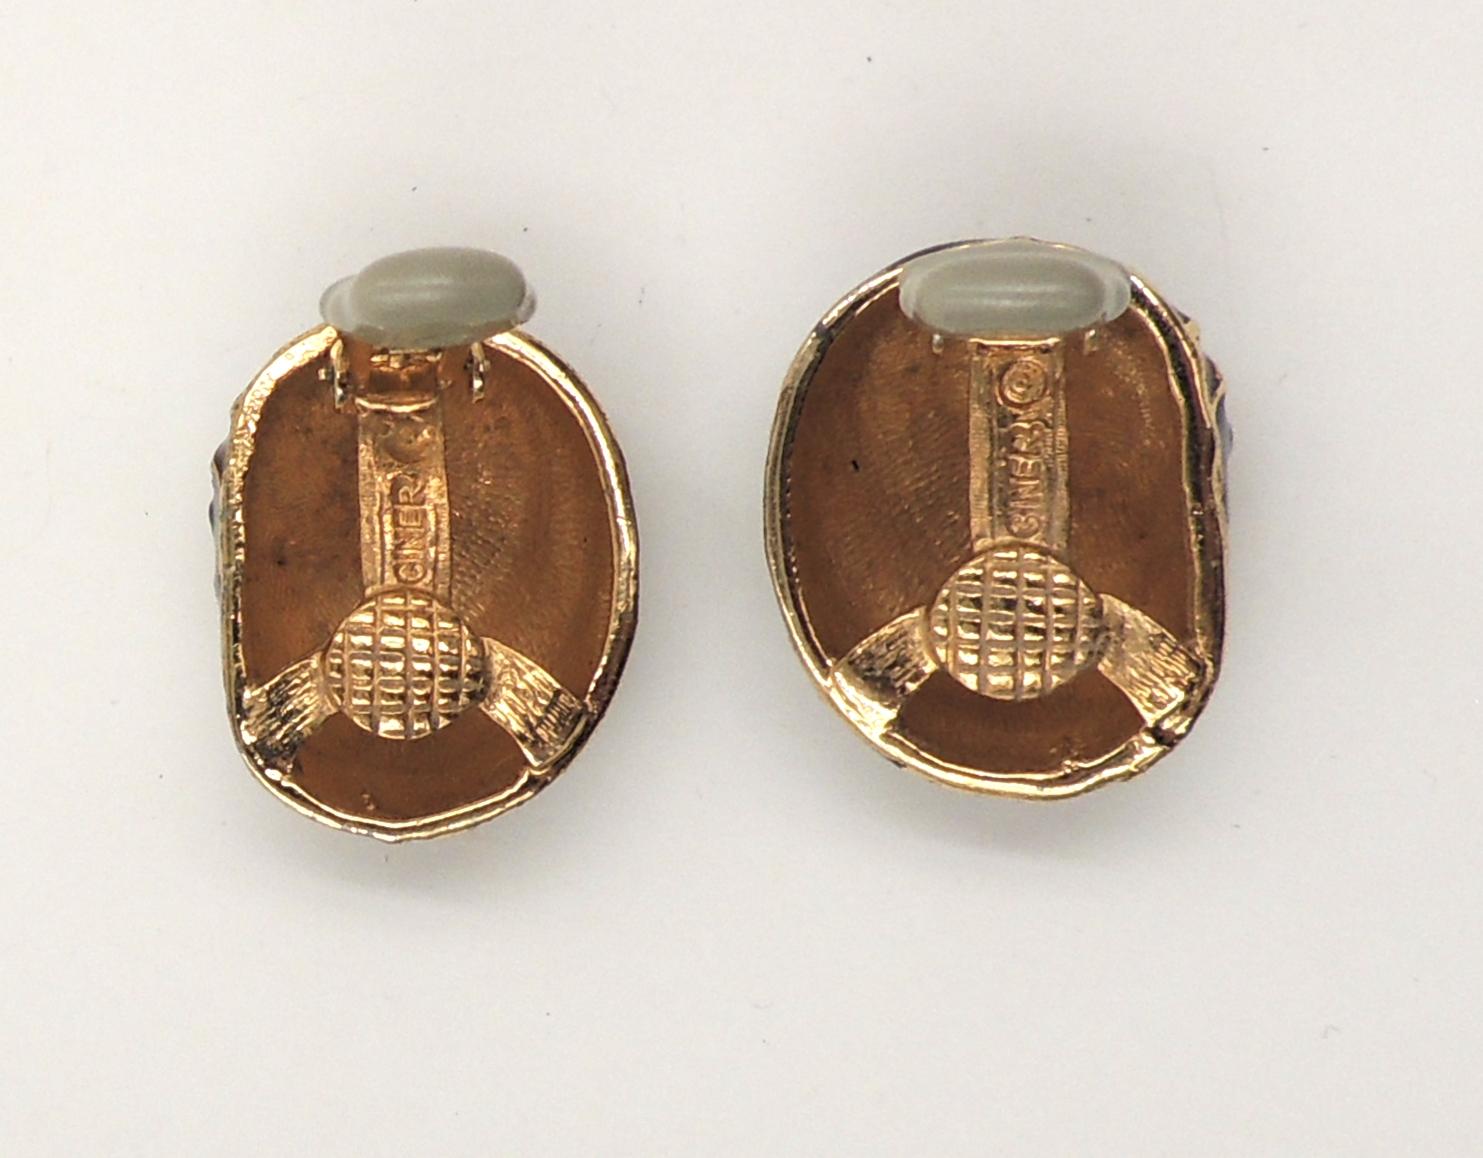 1980s goldtone domed cabochon faux-onyx with brown and black enamel stripes clip back earrings. Marked 